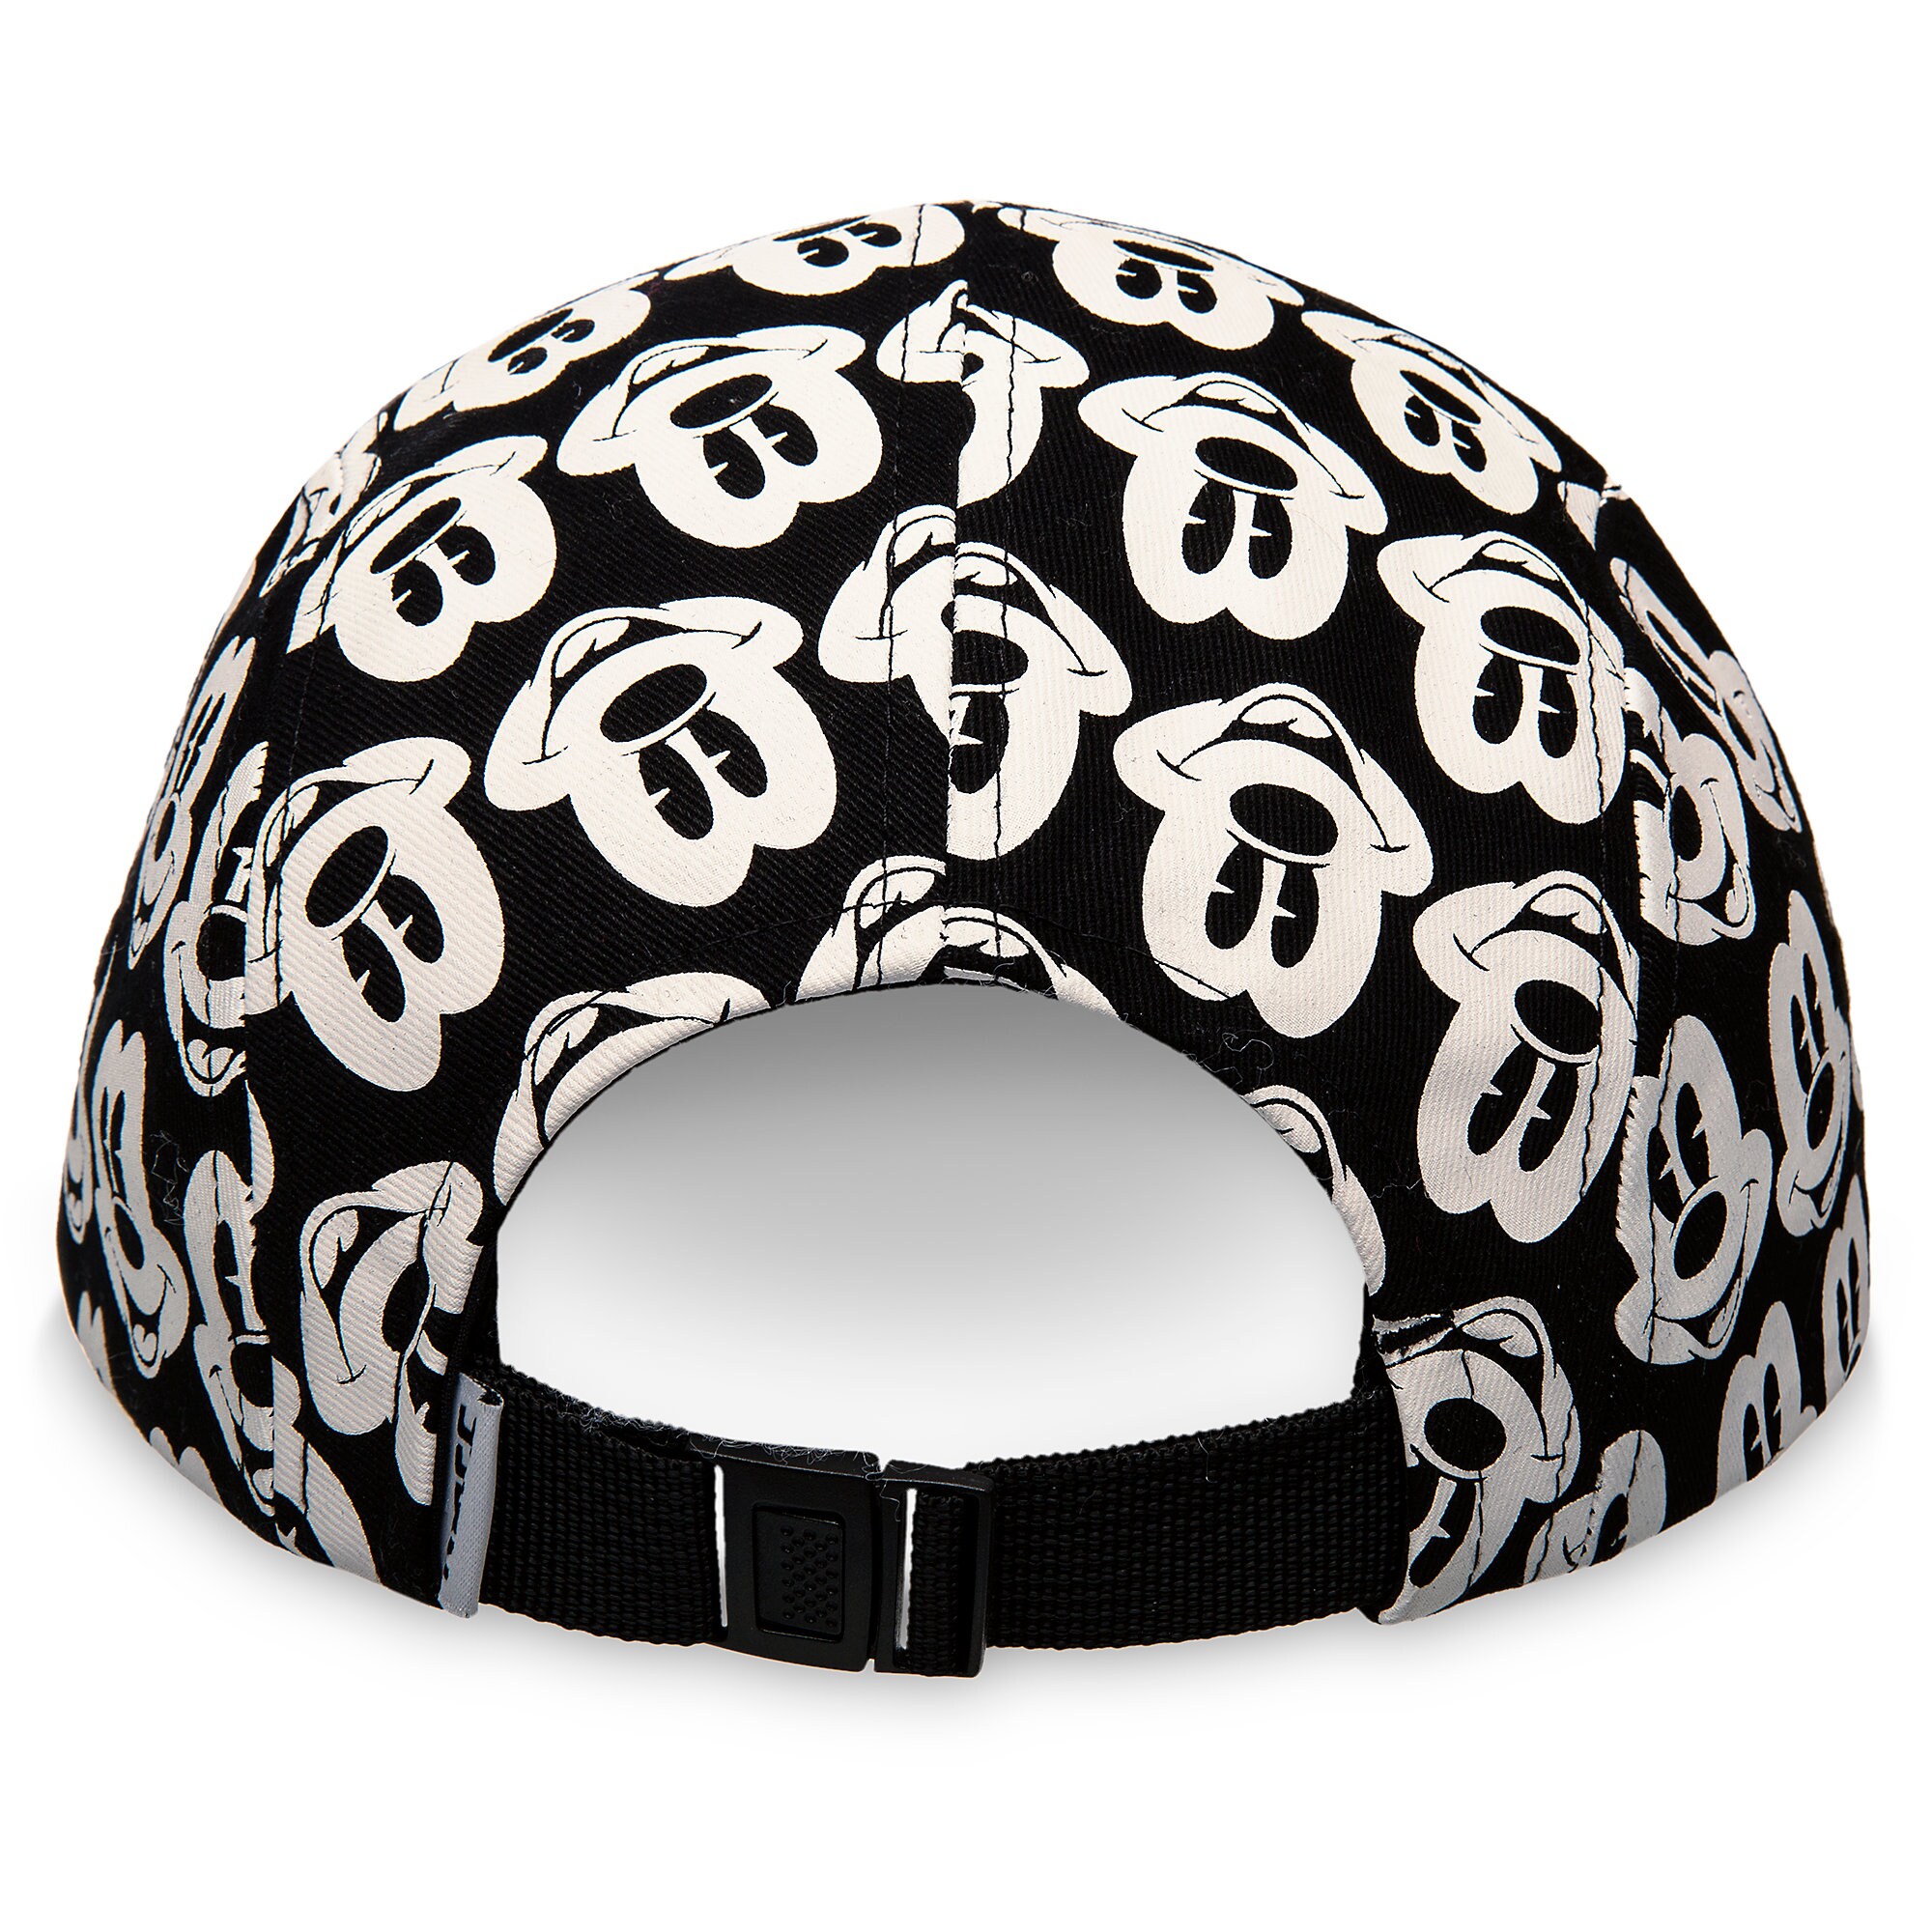 Mickey Mouse 5-Panel Hat for Adults by NEFF